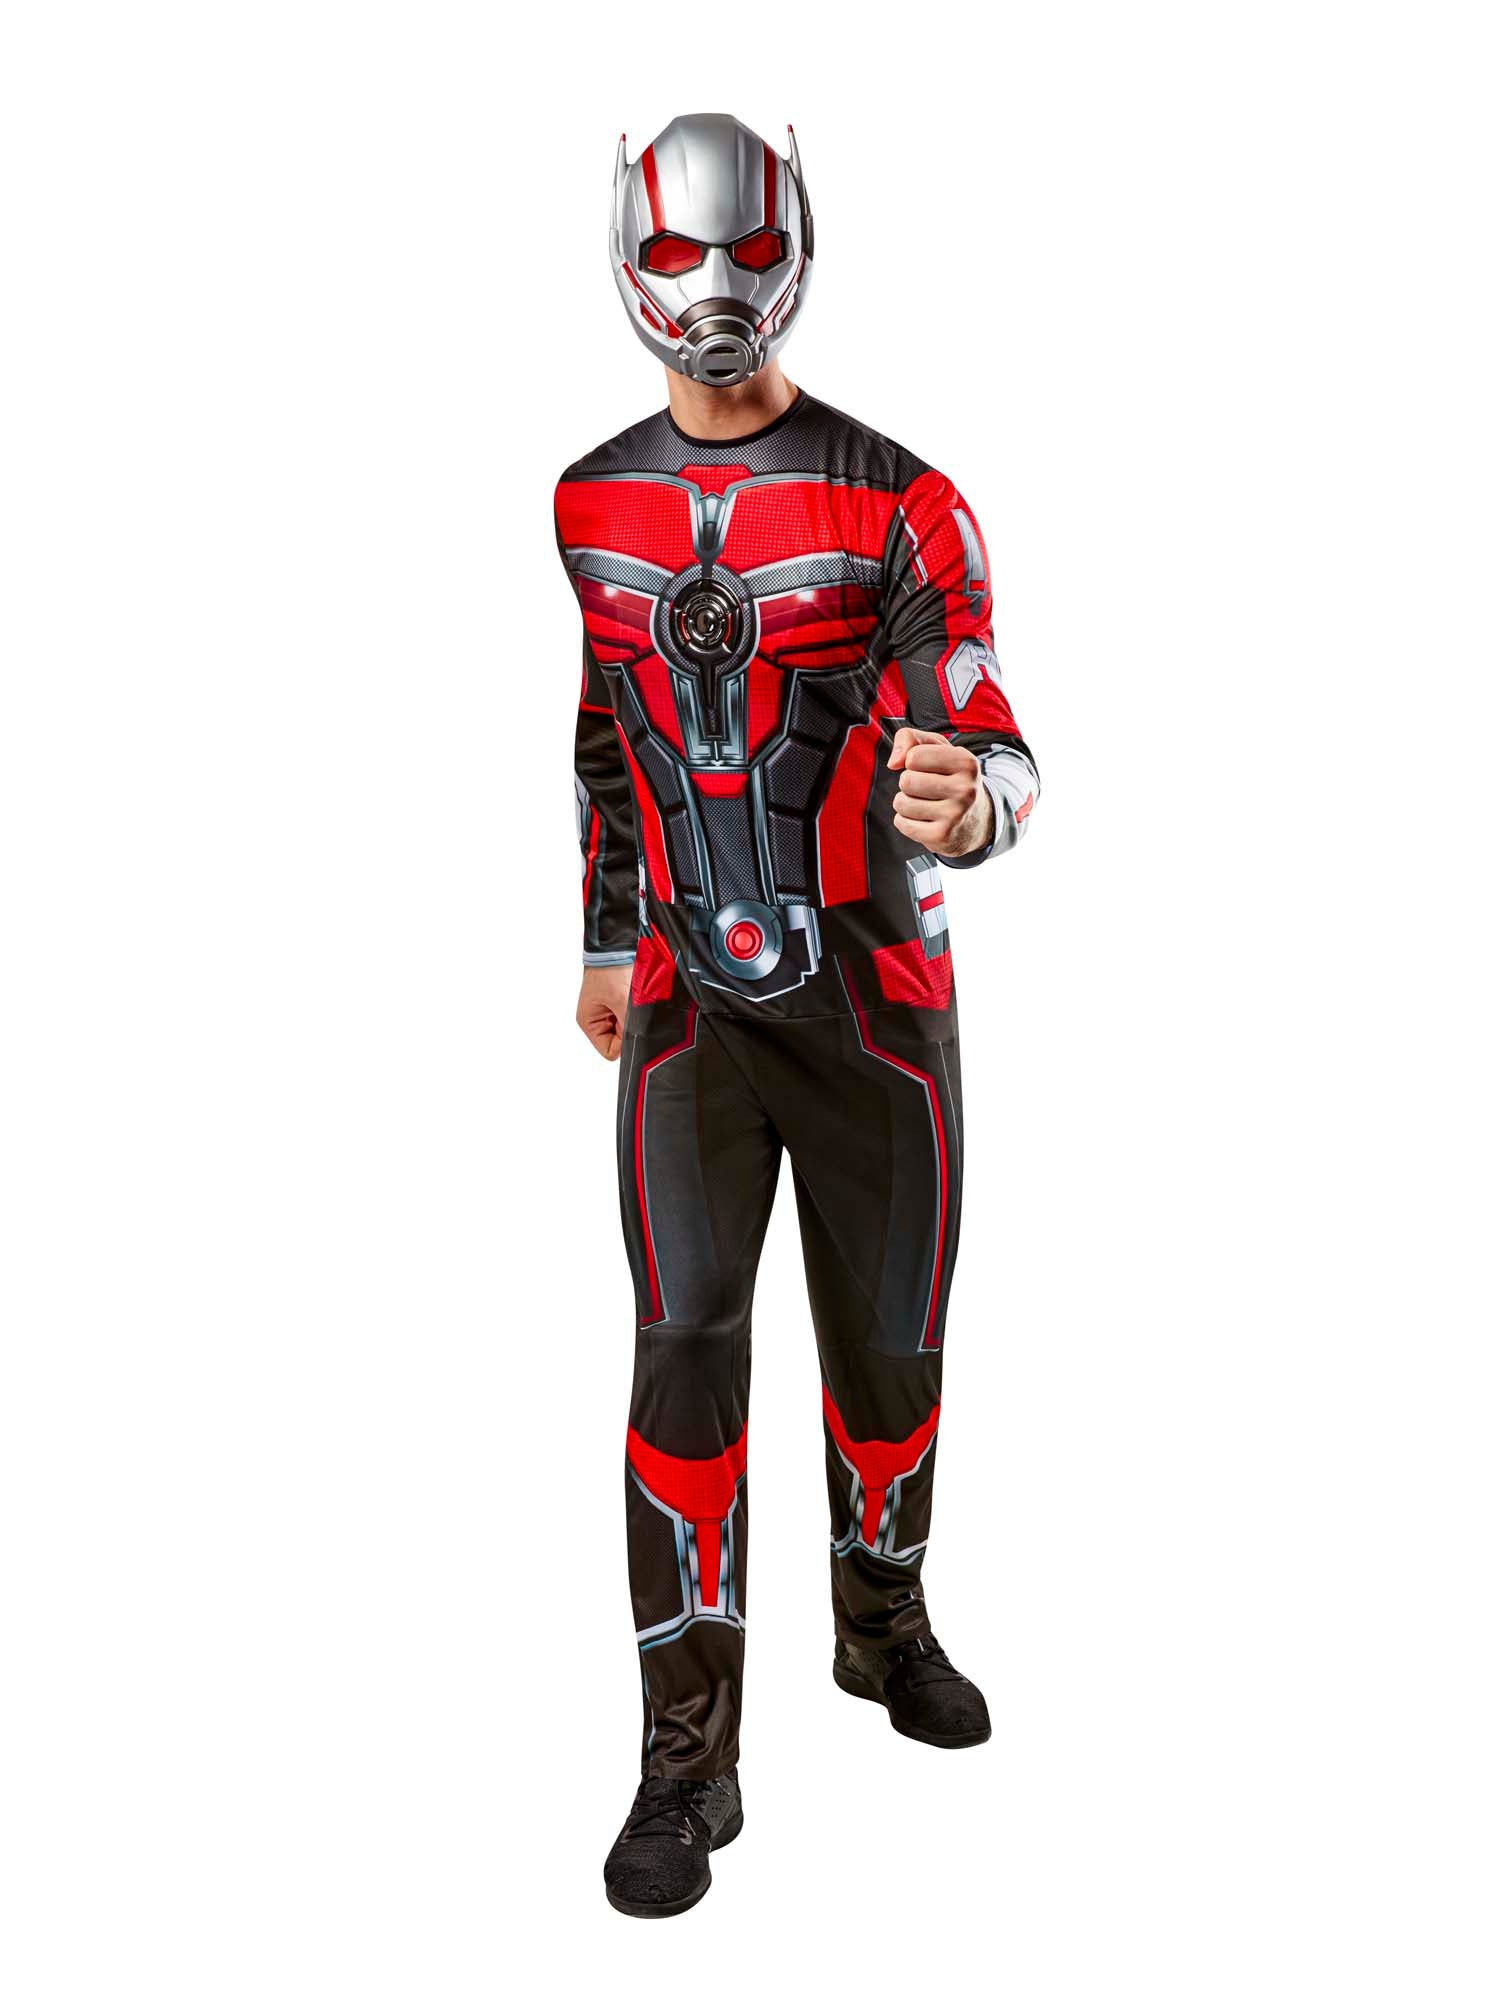 Ant-man, Ant-Man and the Wasp: Quantomania, Ant-Man Quantumania, Ant-Man and the Wasp: Quantomania, Marvel, Adult Costumes, Large, Other